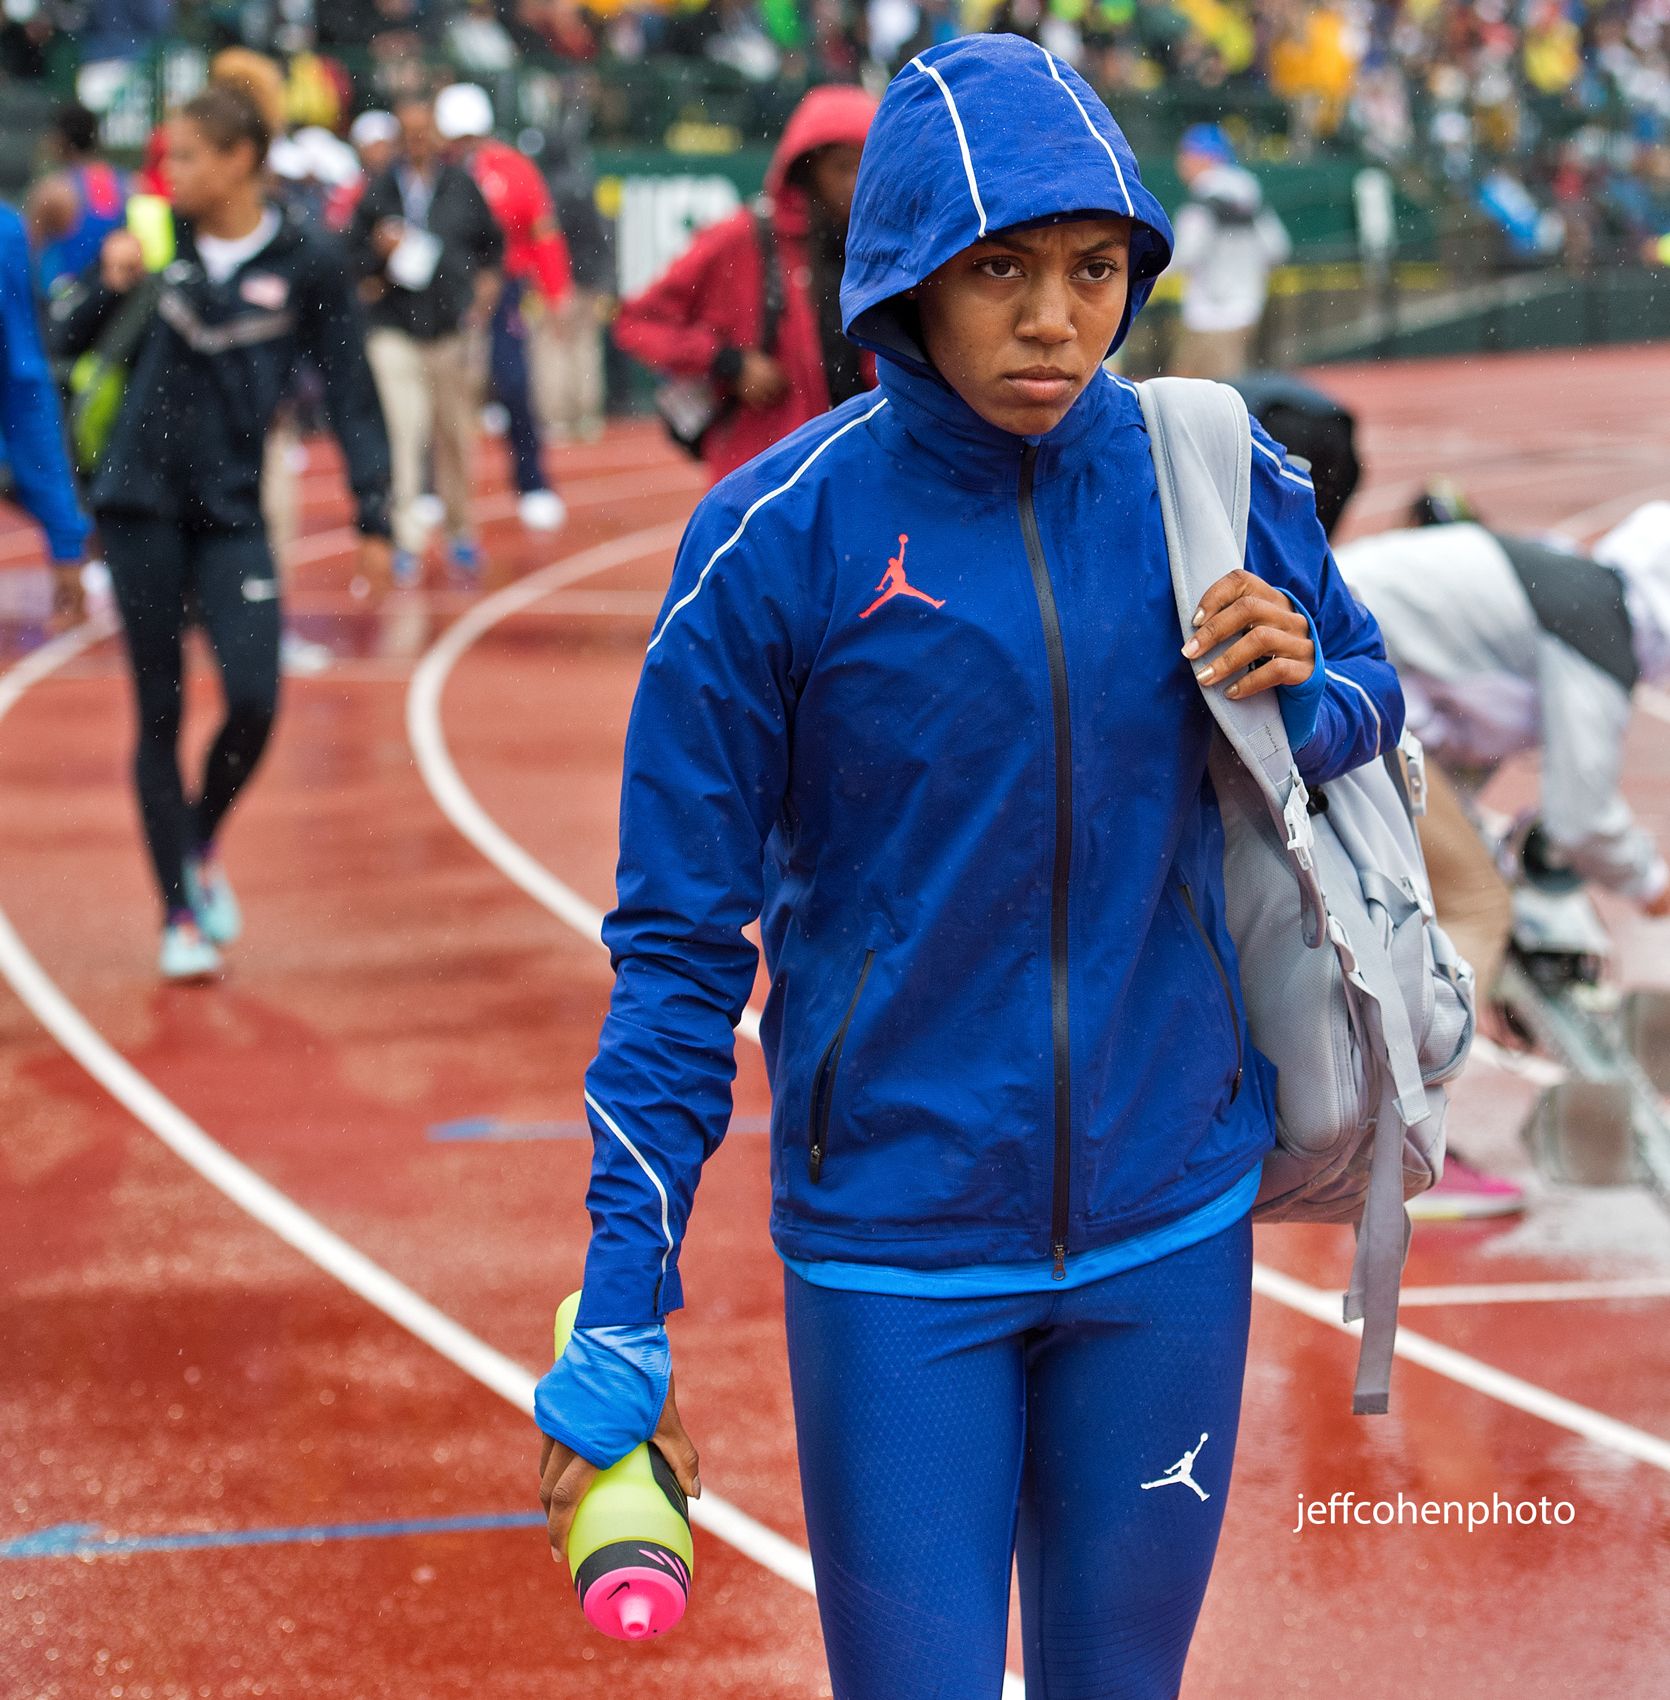 2016-oly-trials-day-7-carter-400mhw-Jeff-cohen-photo-22489-web.jpg